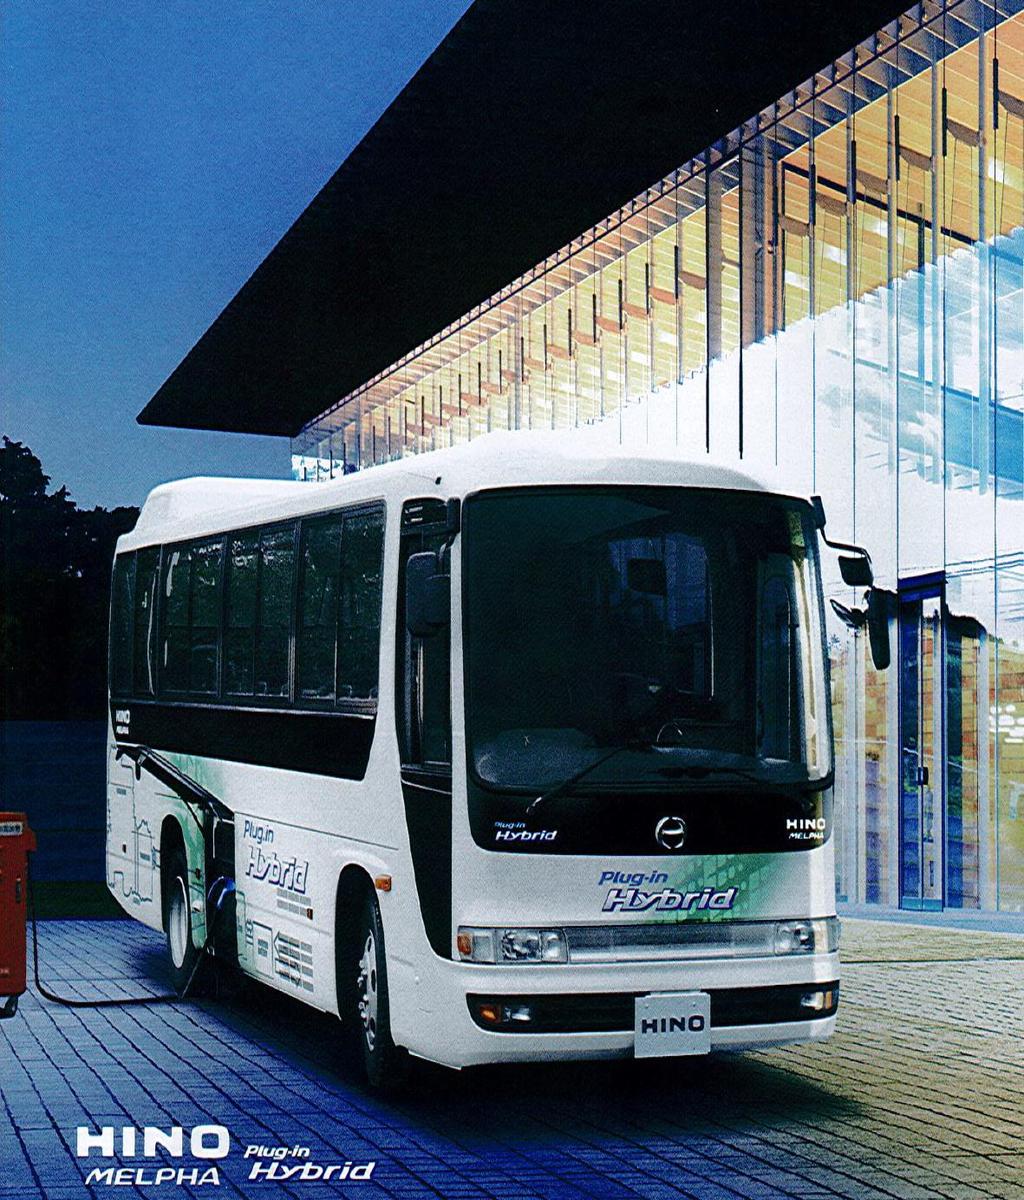 Development of Hino MELPHA Plug-in Hybrid bus with combination of Existing HIL and TruckMaker To make the world a better place to live by helping